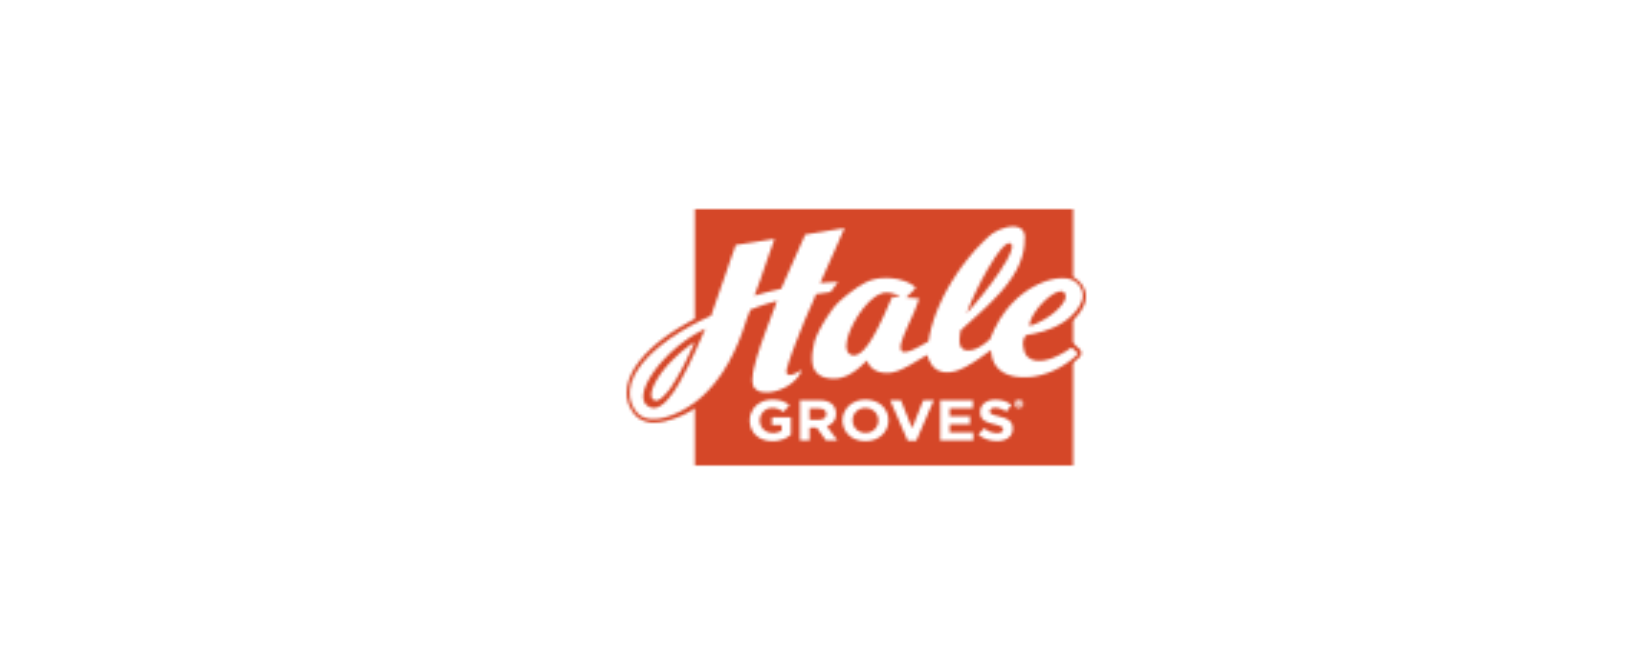 Hale Groves Discount Code 2022